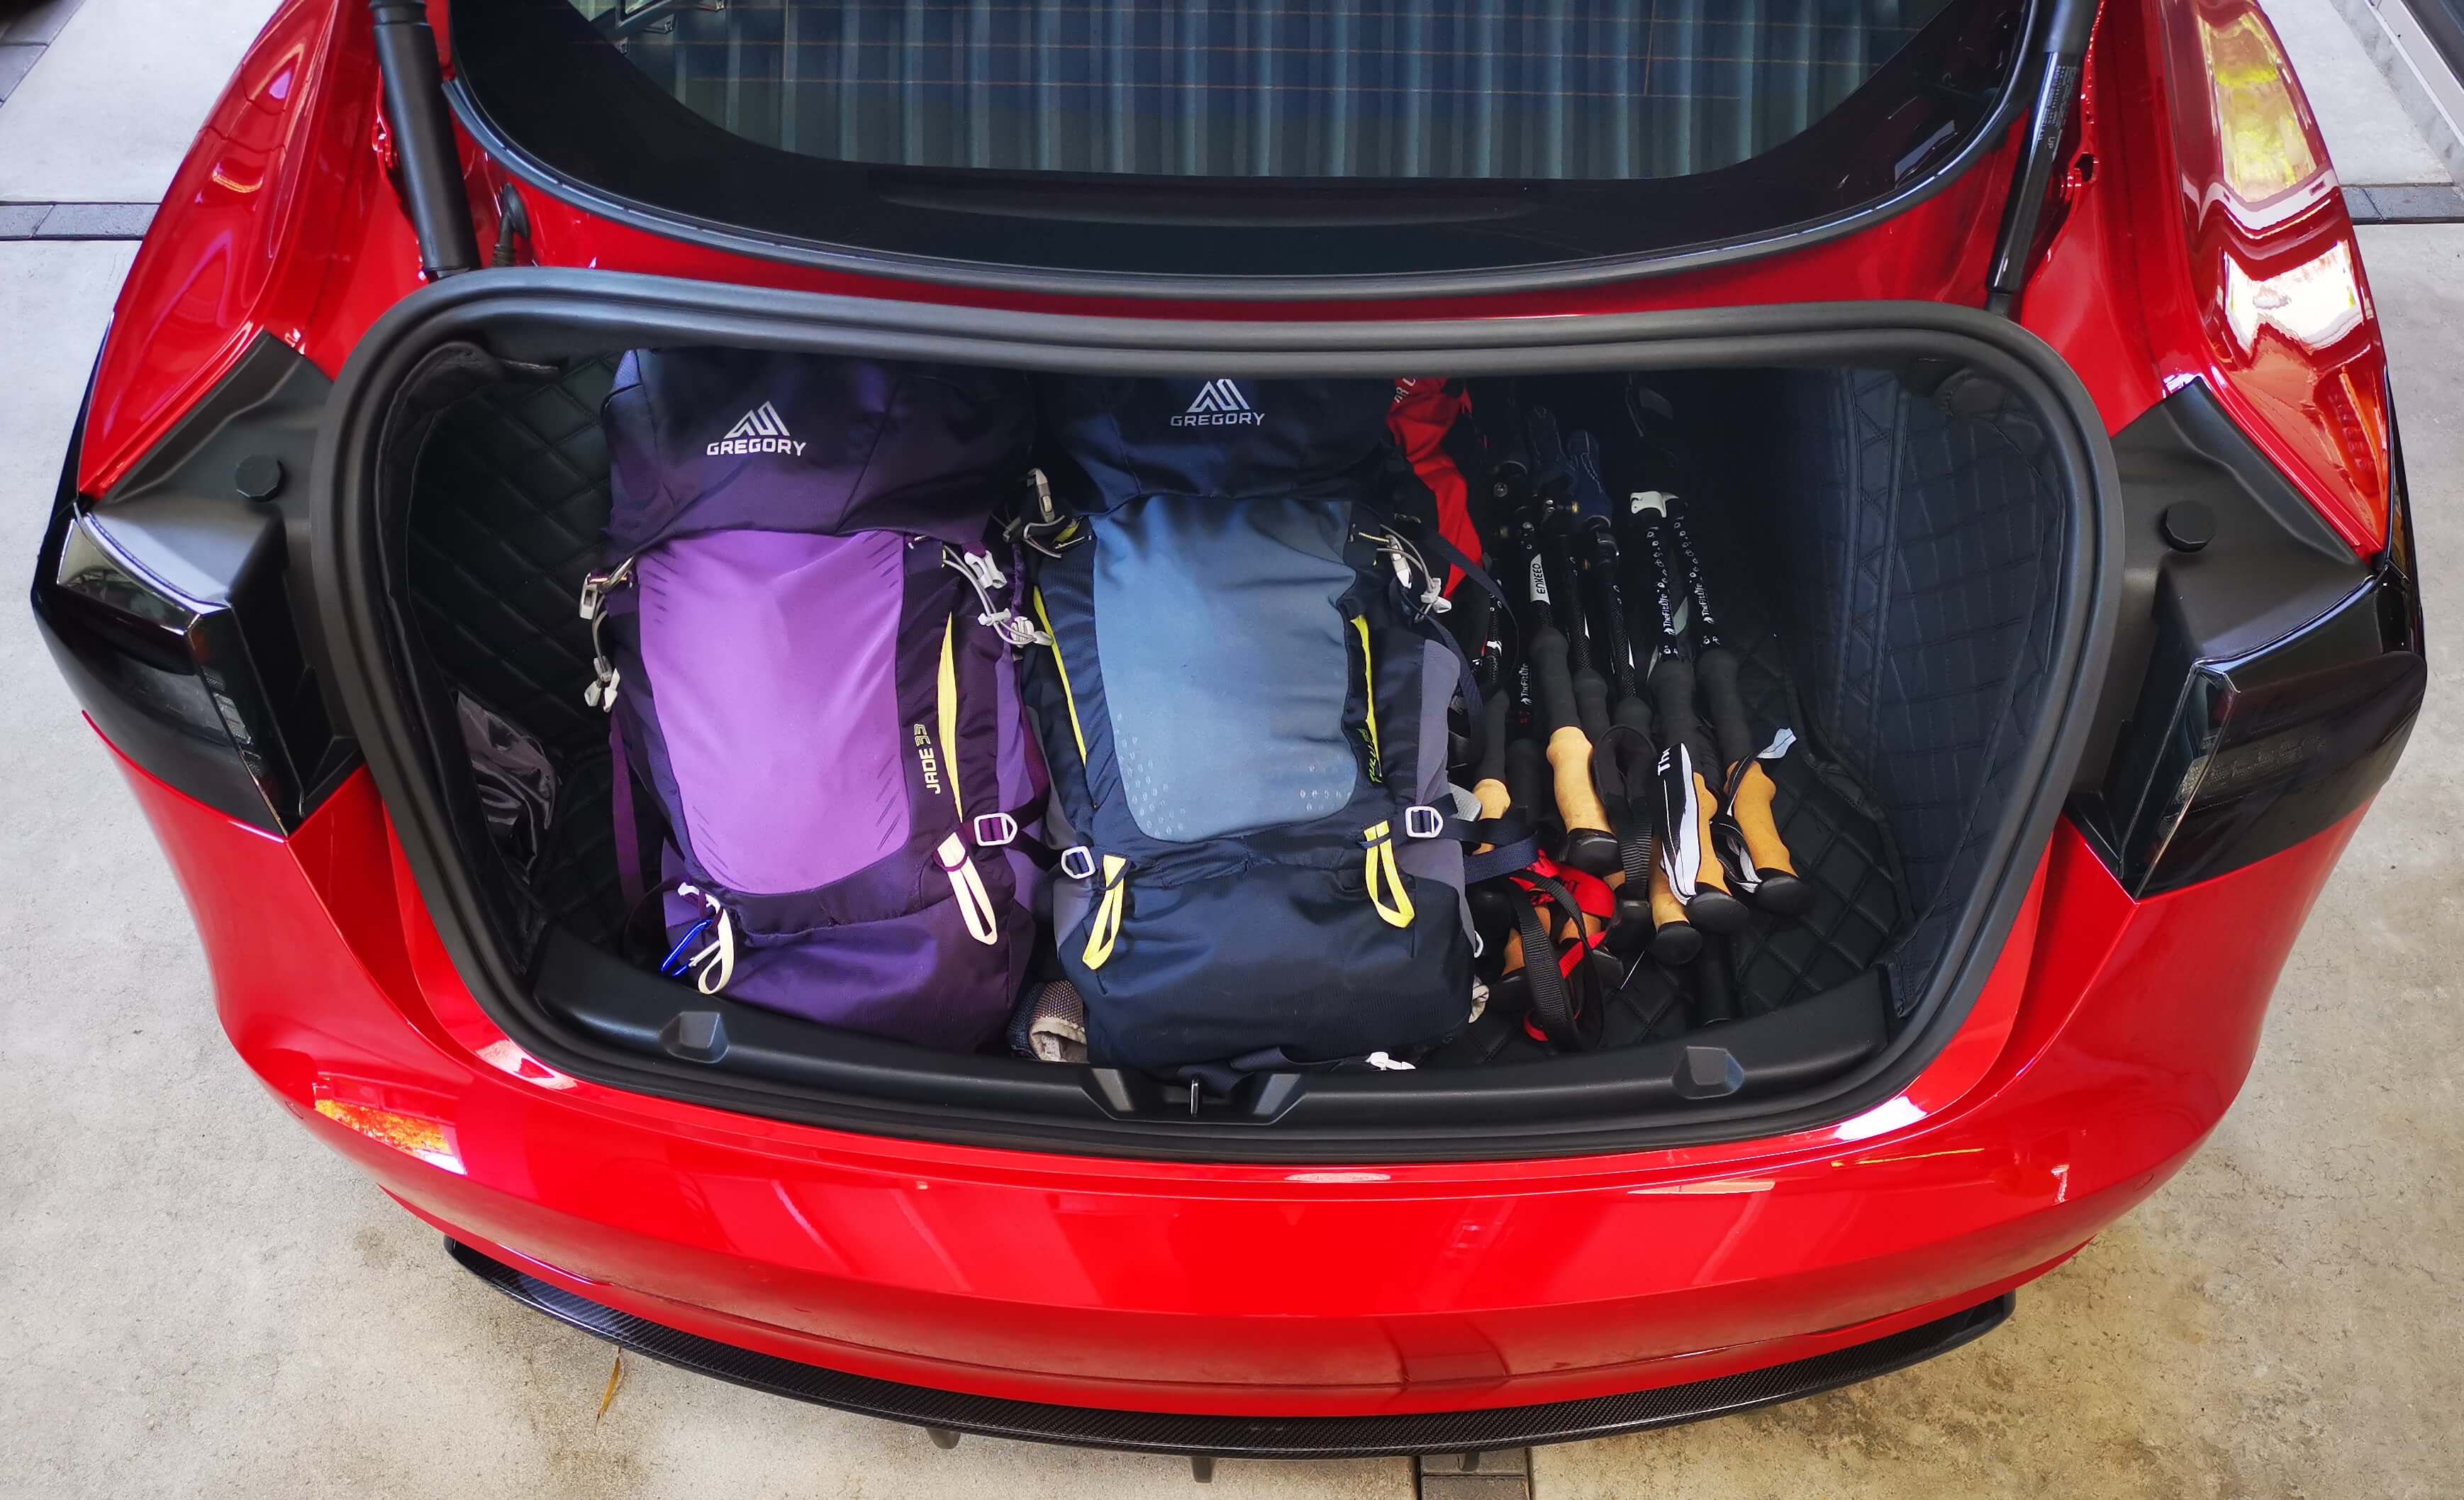 Hiking bags and poles in the rear trunk of red Model 3